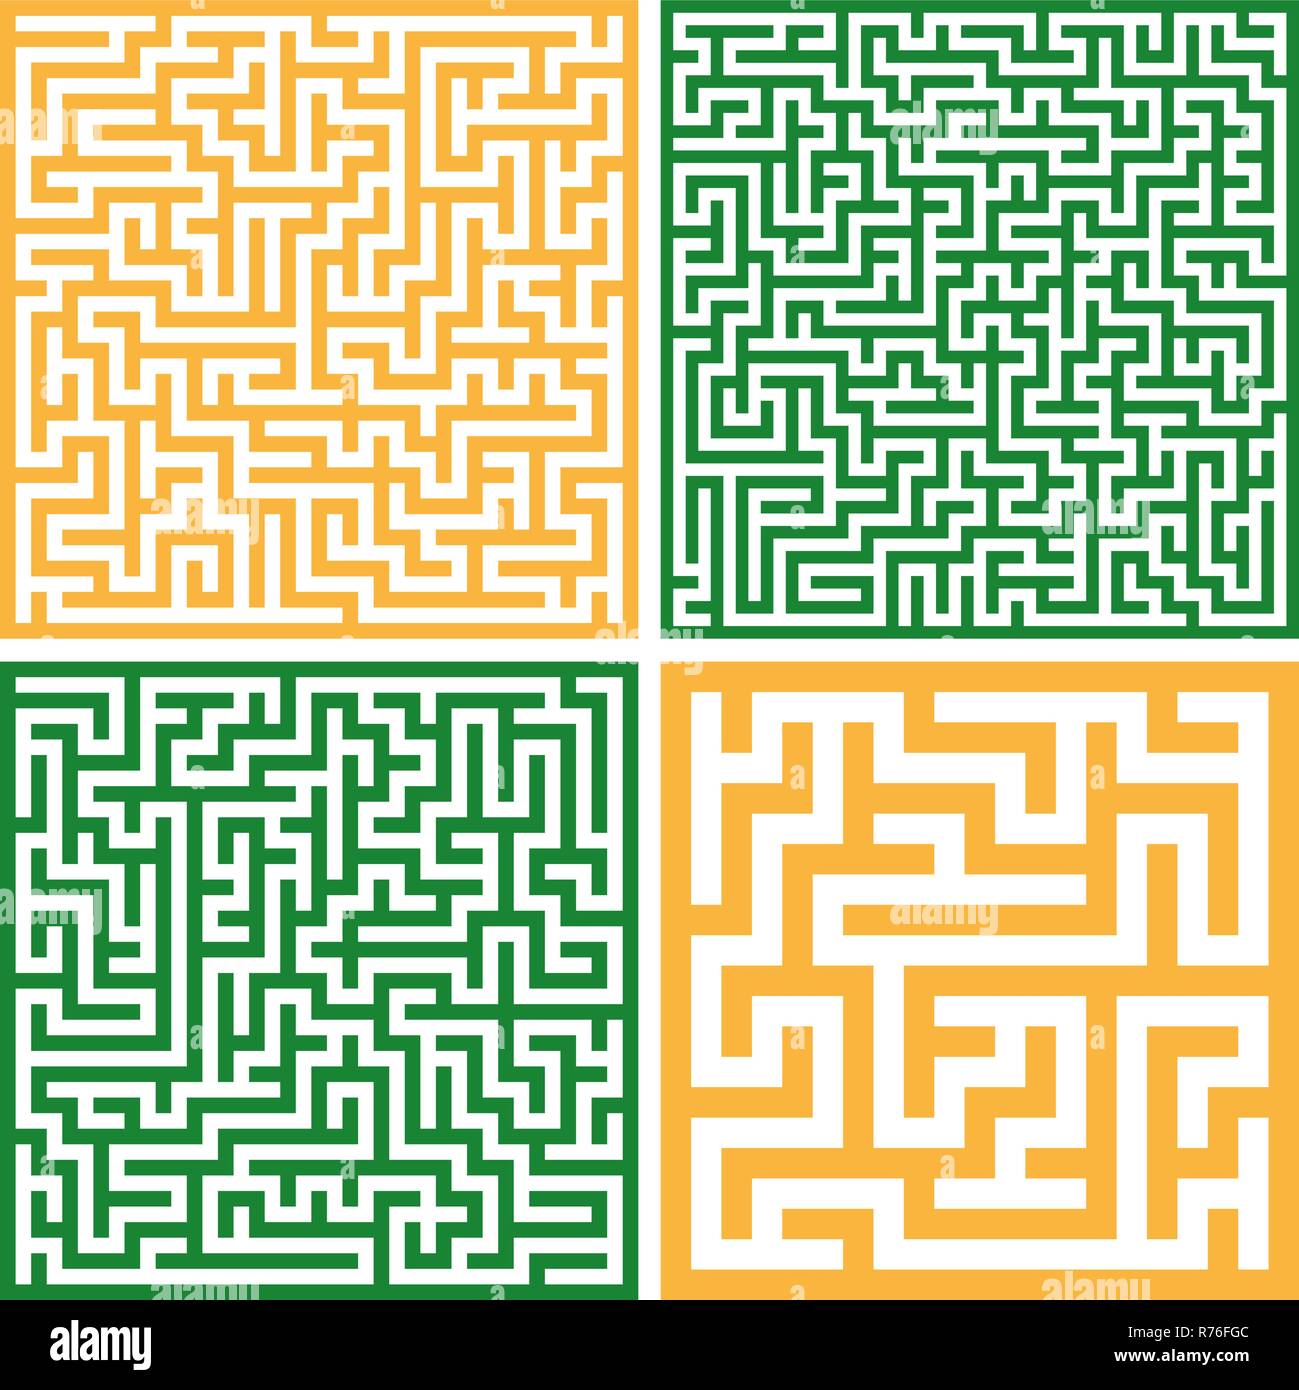 Set of colorful mazes/ Good for logo or icon, Vector background illustration. Stock Vector